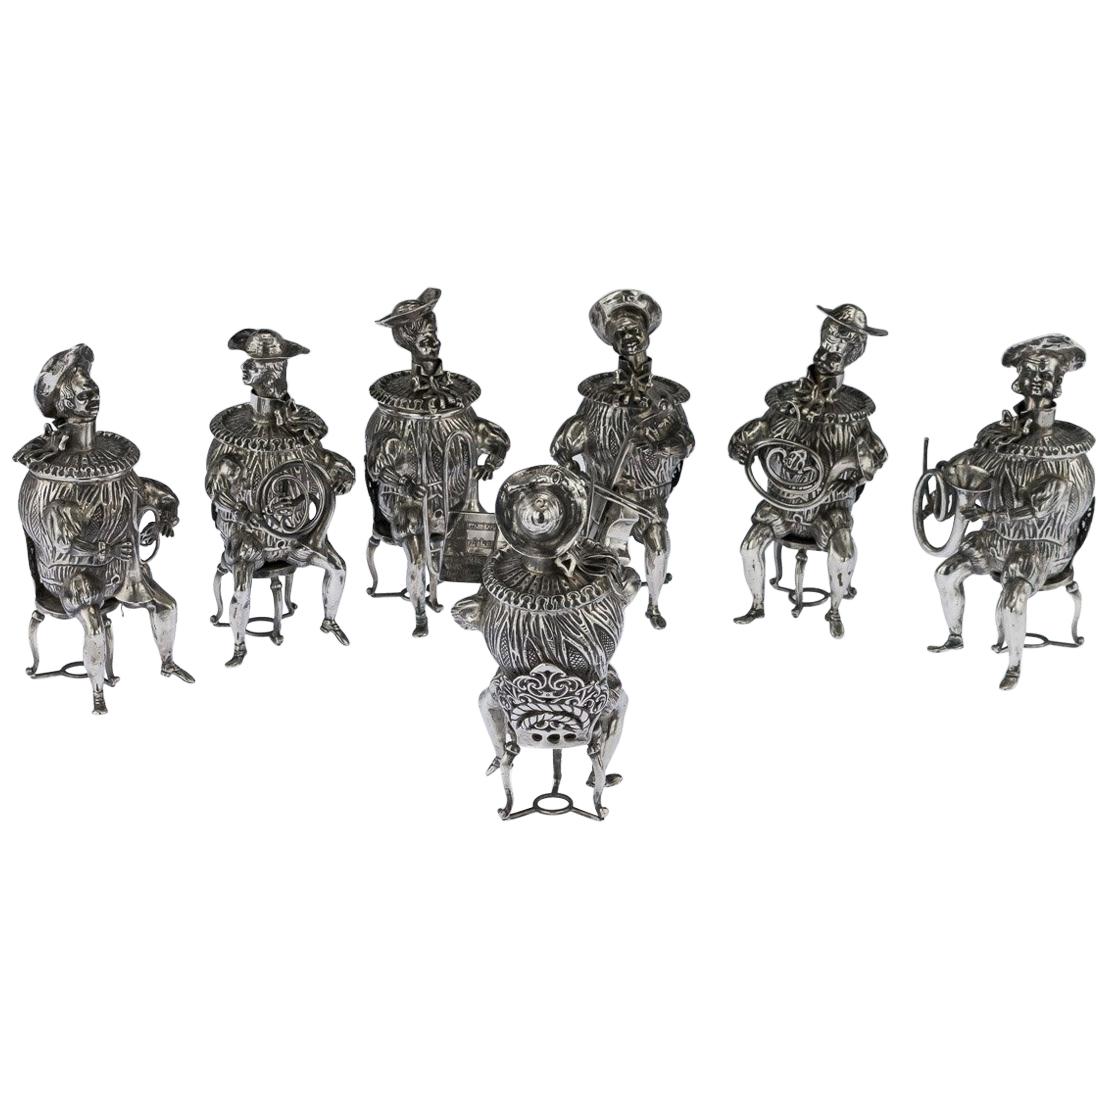 Antique German Solid Silver Set of Seven Musicians Novelty Cups, circa 1910